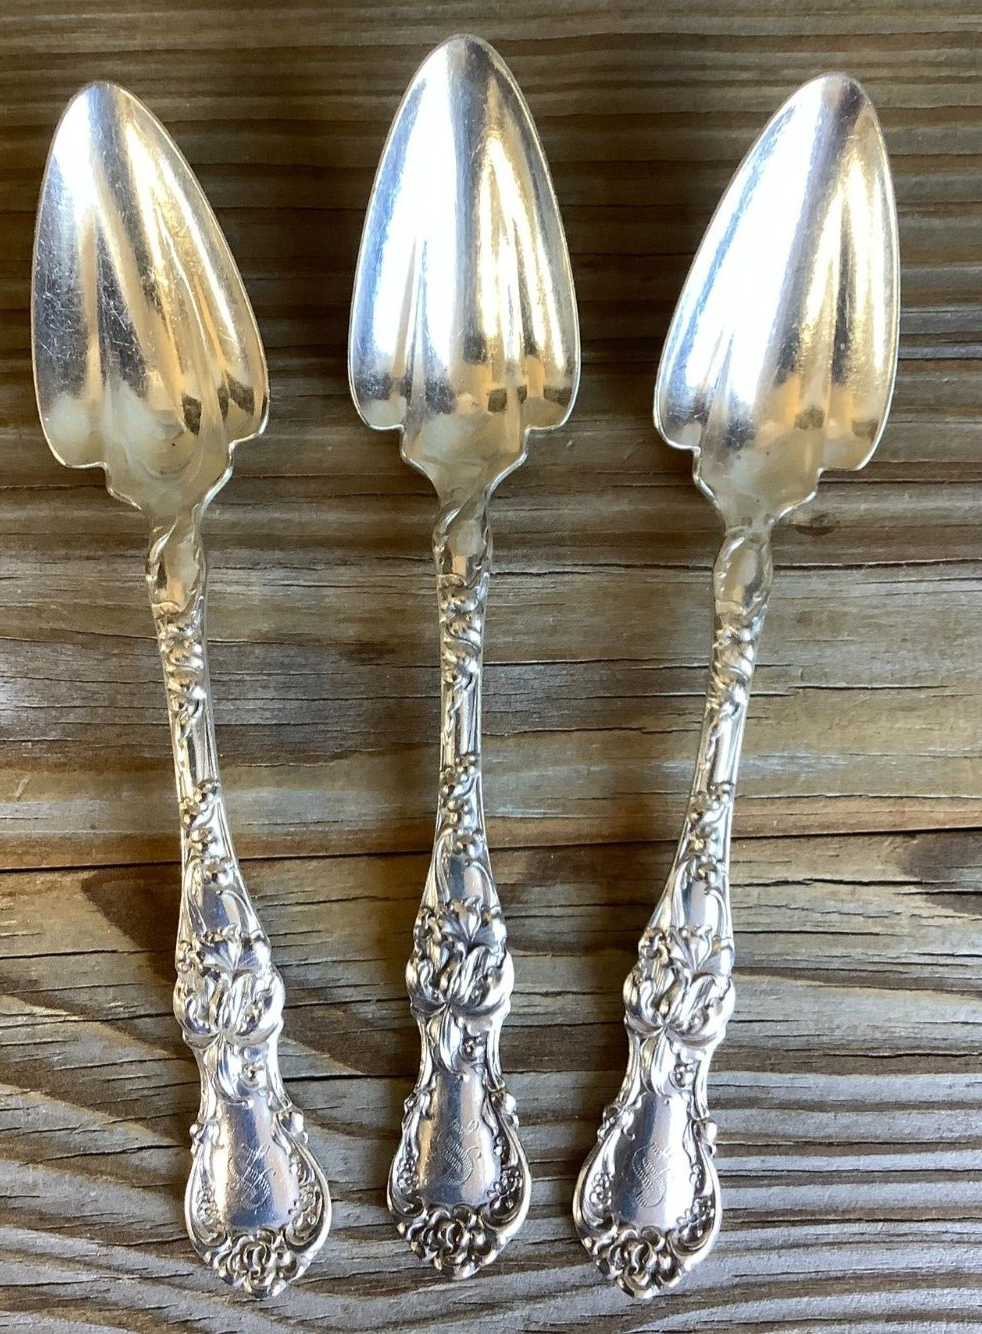 1835 R WALLACE - (1902) FLORAL pattern - LOT of 3 FRUIT SPOONS - 6" - mono "S" 1835 R.Wallace